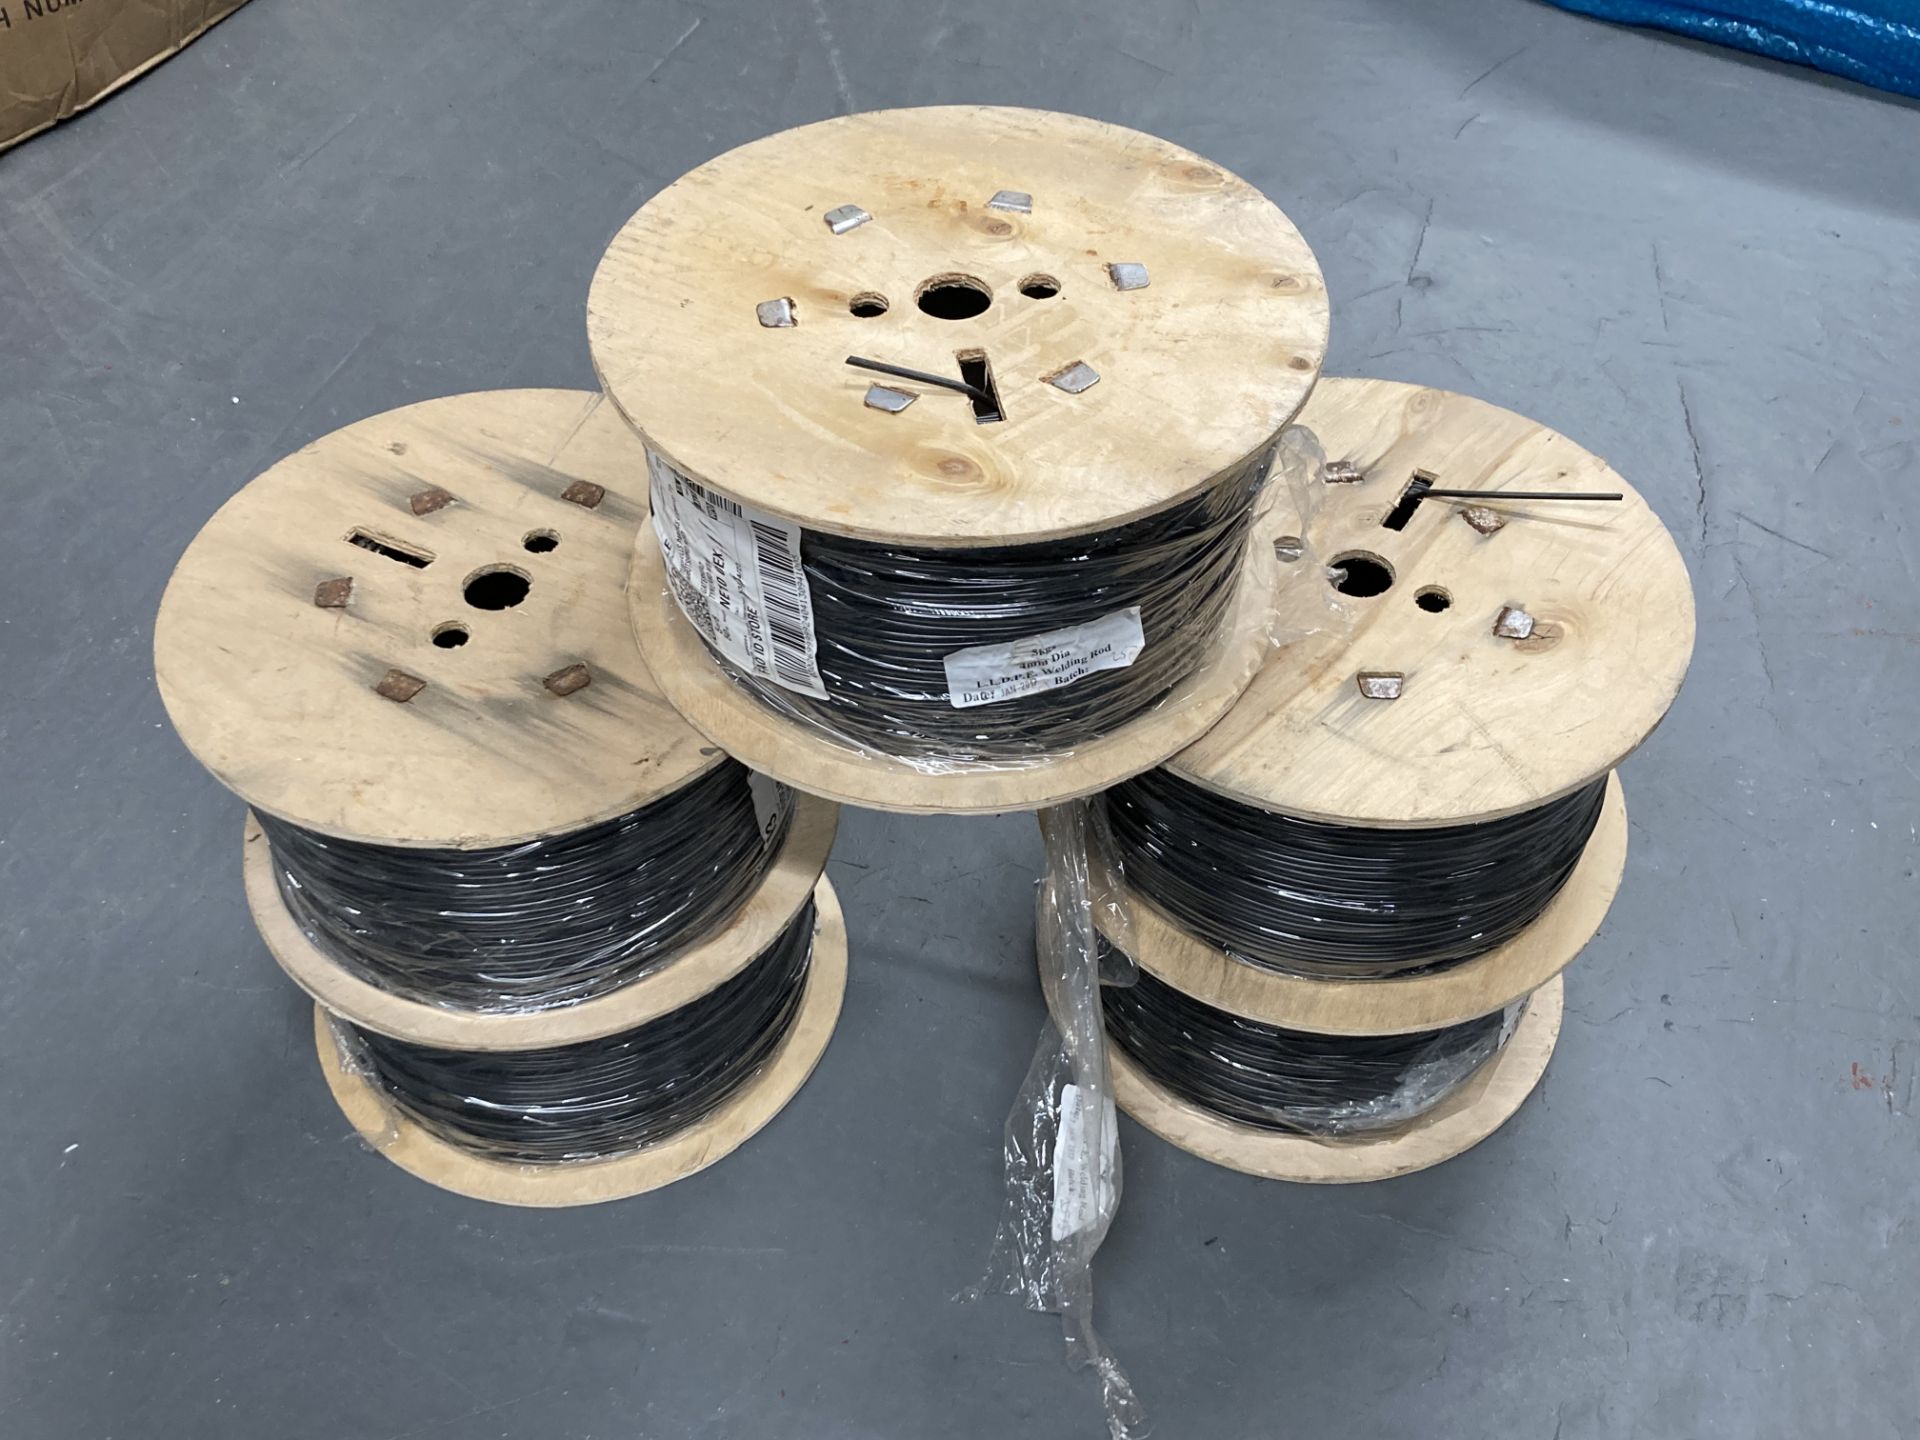 Five spools of welding cable.